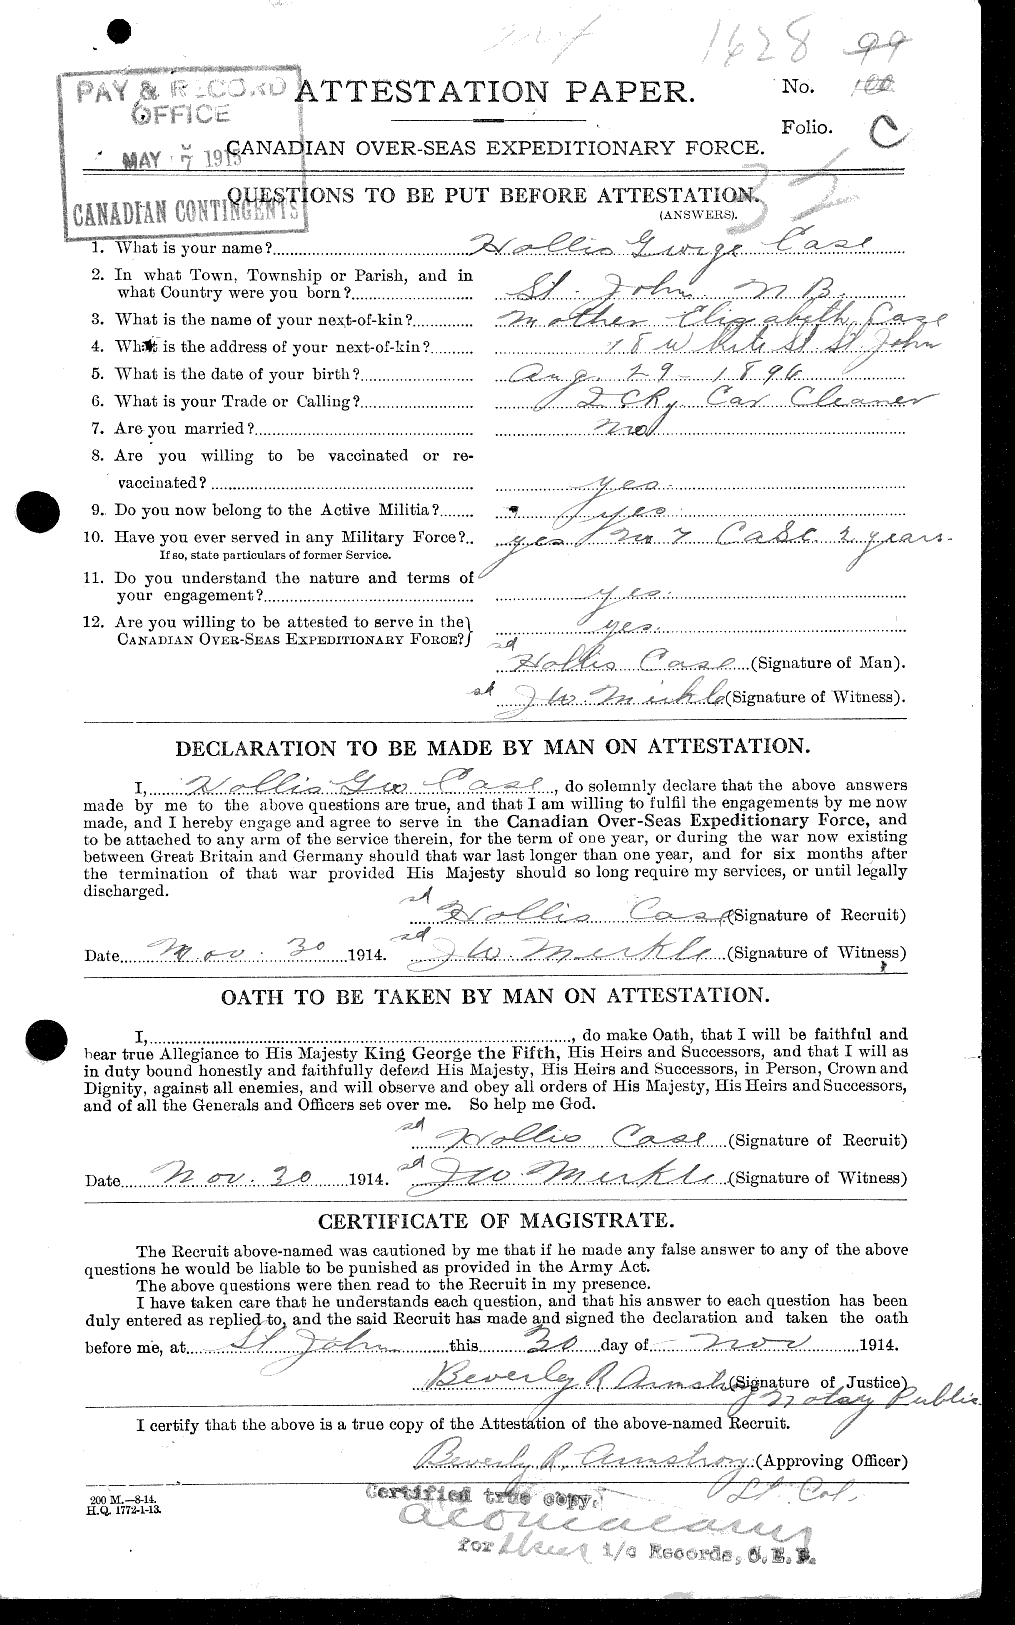 Personnel Records of the First World War - CEF 012712a